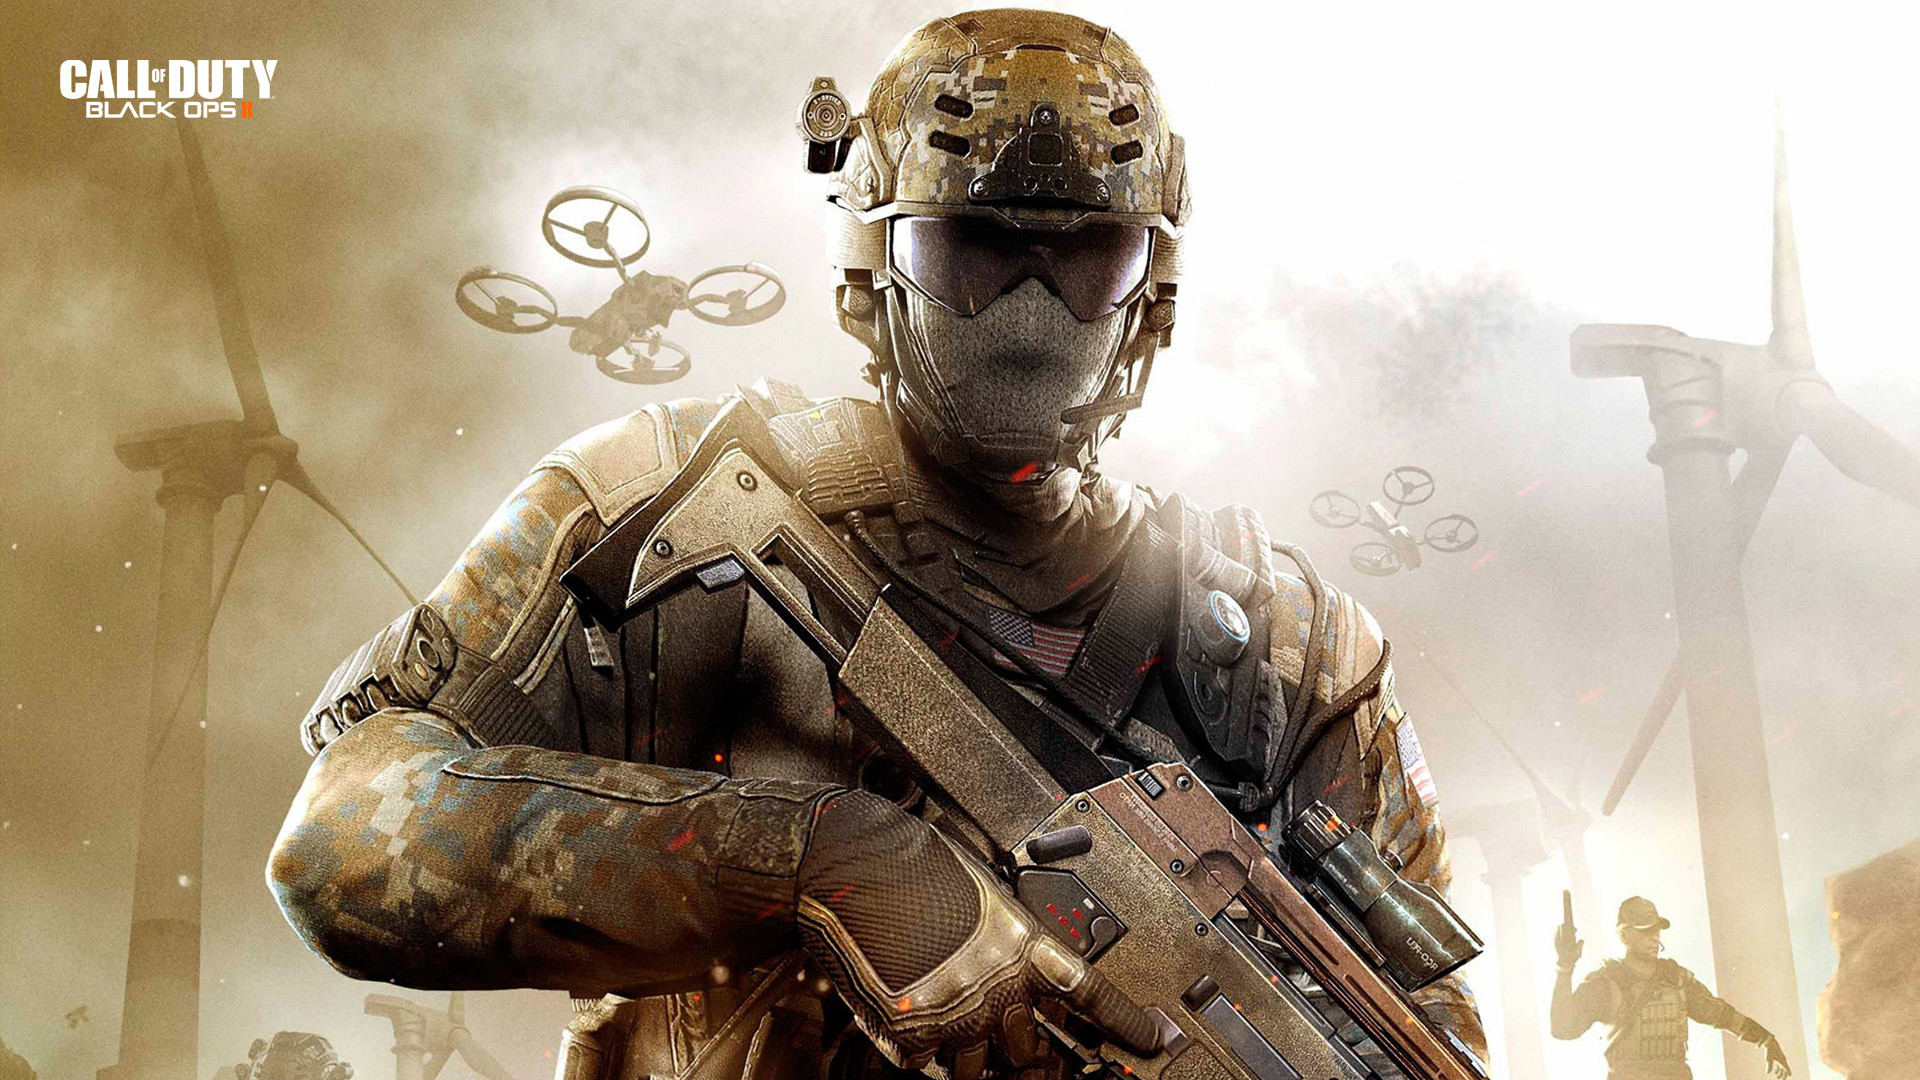 1920x1080 PC Call Of Duty Black Ops Awesome Wallpapers | HD Wallpapers | Pinterest | Black  ops, Hd wallpaper and Wallpaper